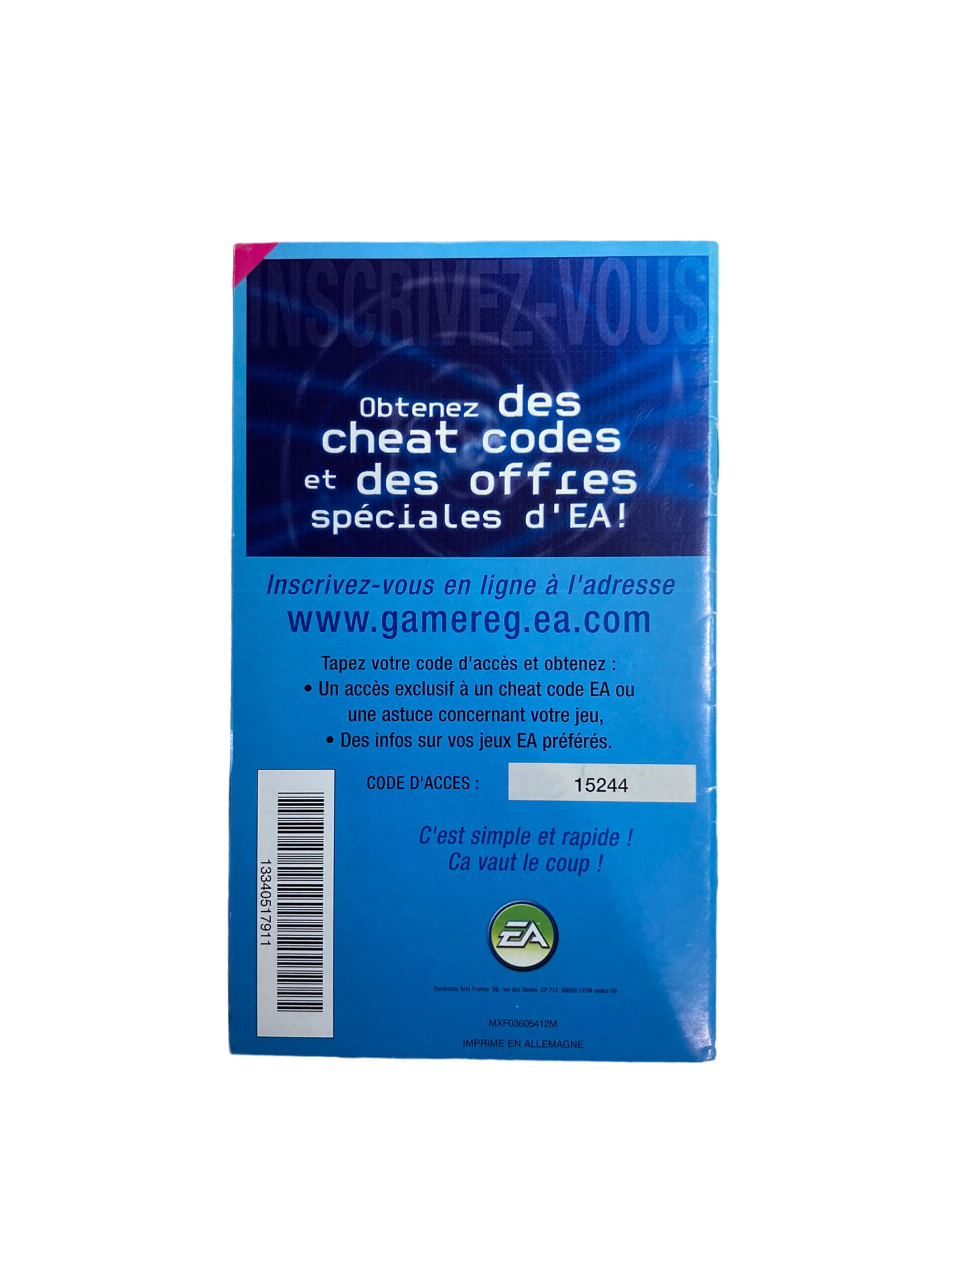 Notice Les Sims 2 : Animaux & Cie